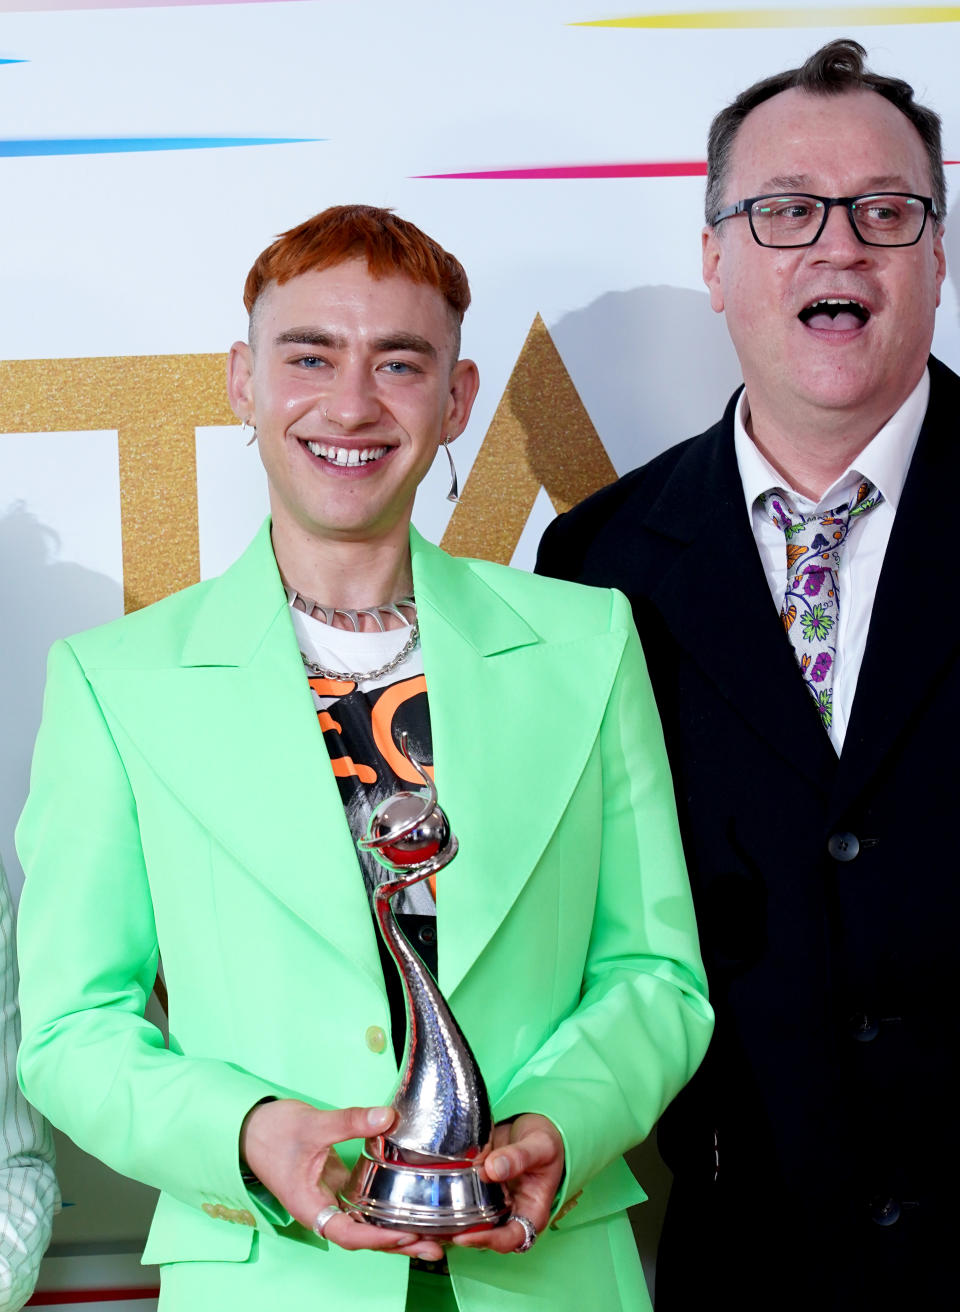 Olly Alexander (left) and Russell T Davies in the press room after winning the New Drama award for It's A Sin at the National Television Awards 2021 held at the O2 Arena, London. Picture date: Thursday September 9, 2021. (Photo by Ian West/PA Images via Getty Images)